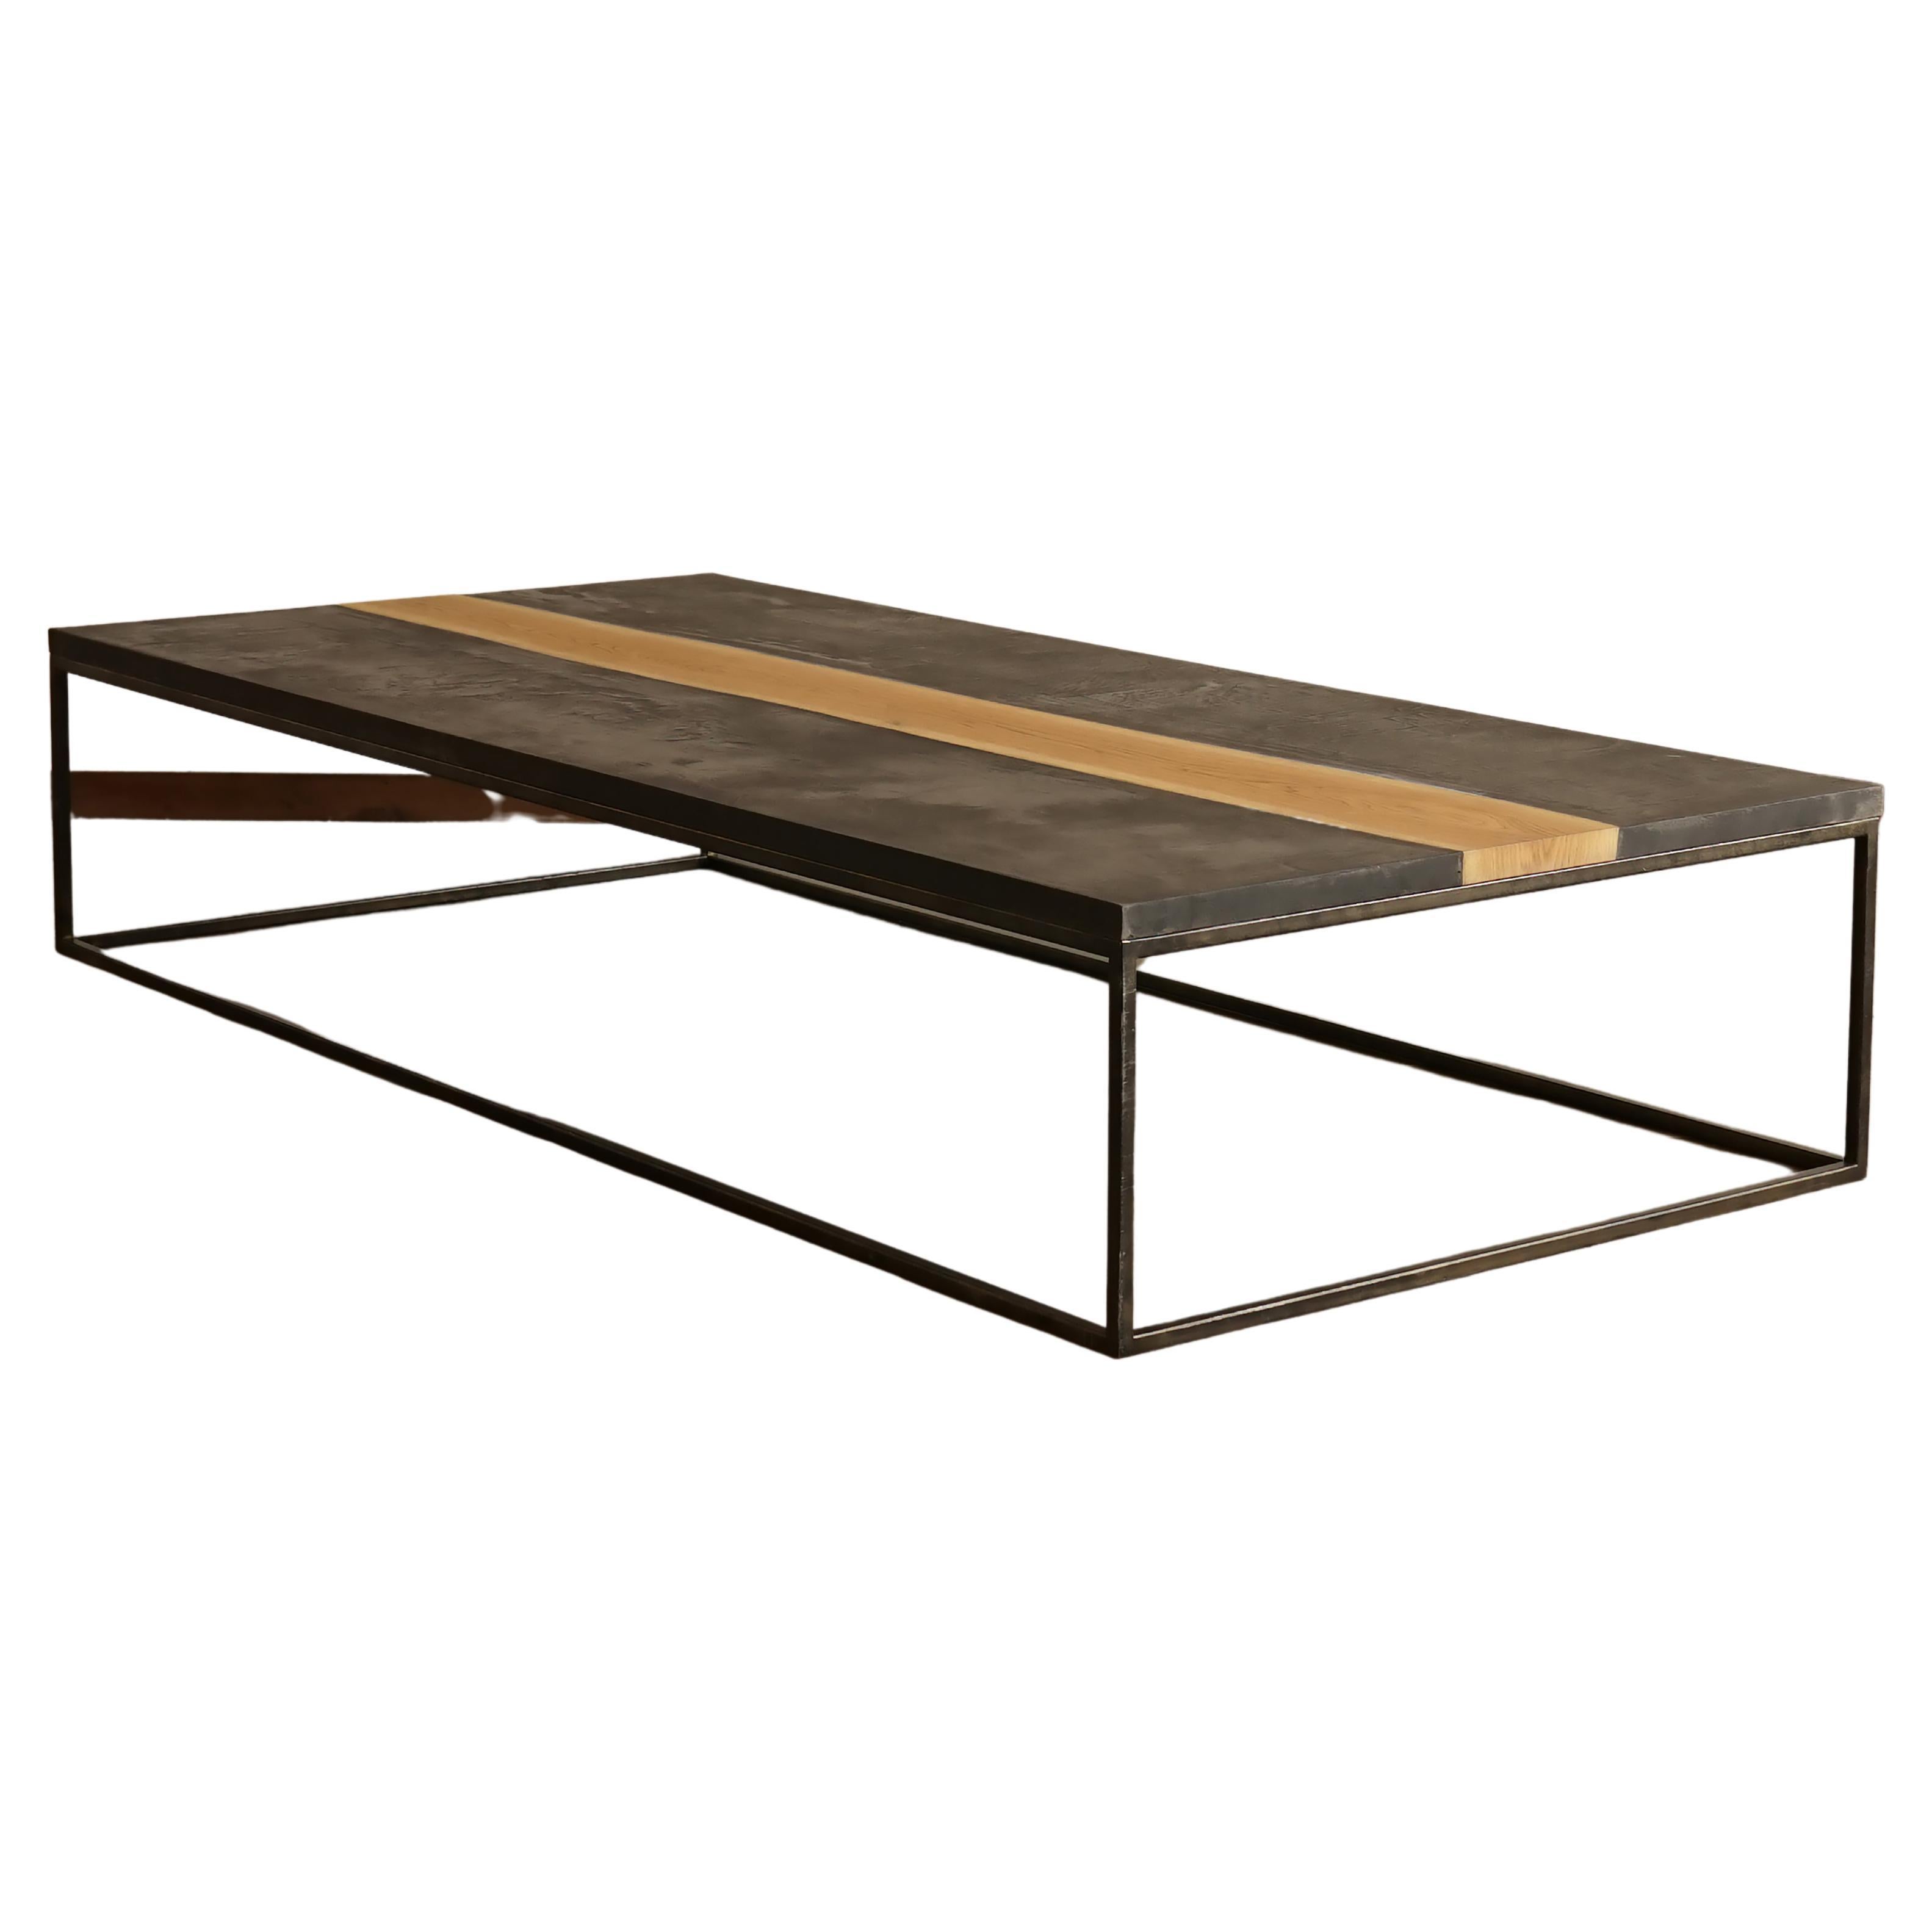 Eterno Mortex Table For Sale at 1stDibs